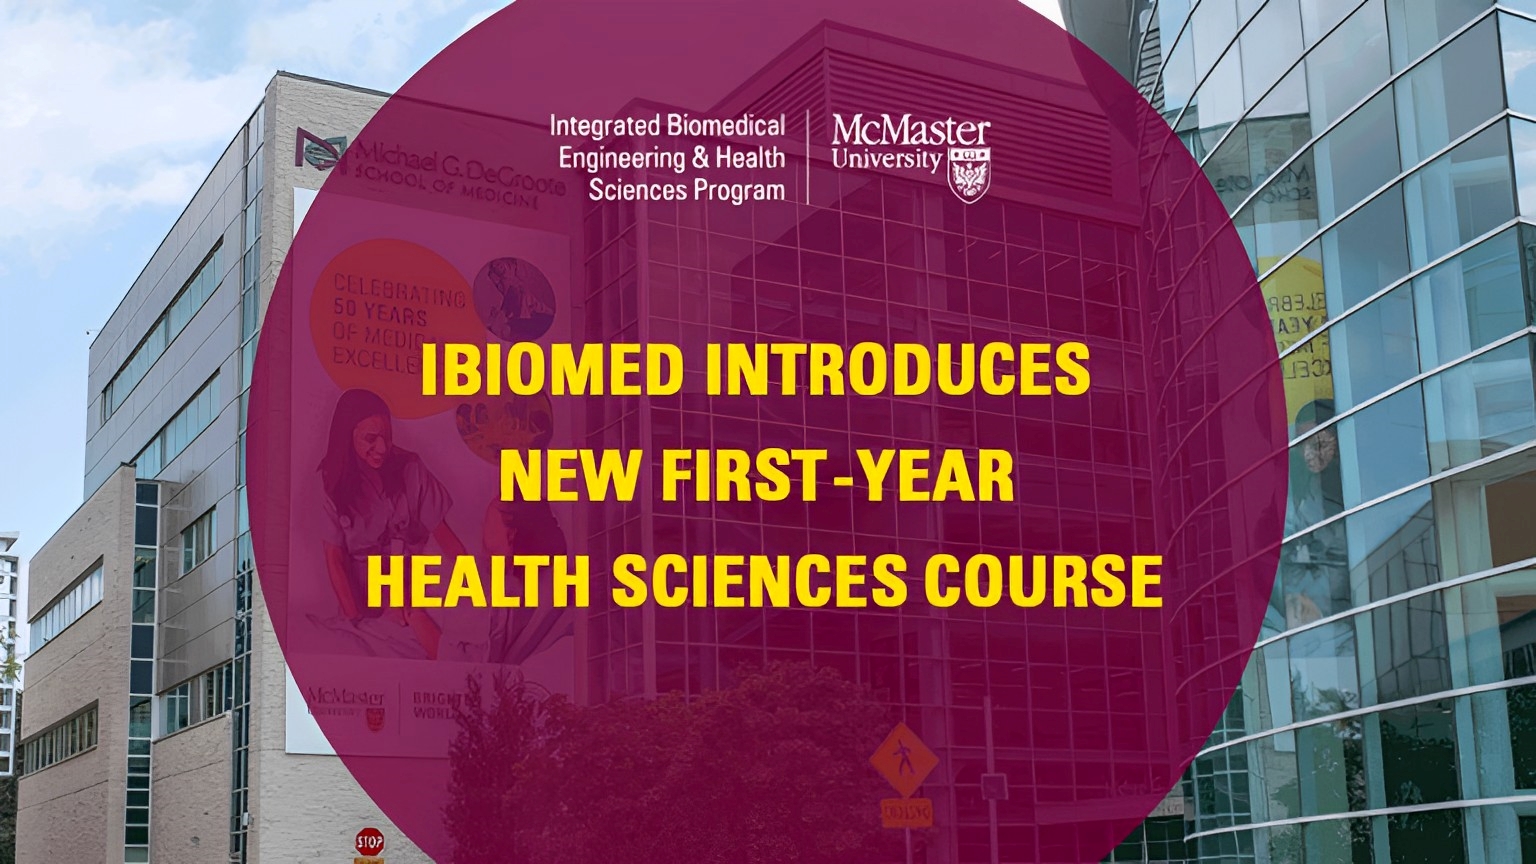 ibiomed introduces new first-year health sciences course